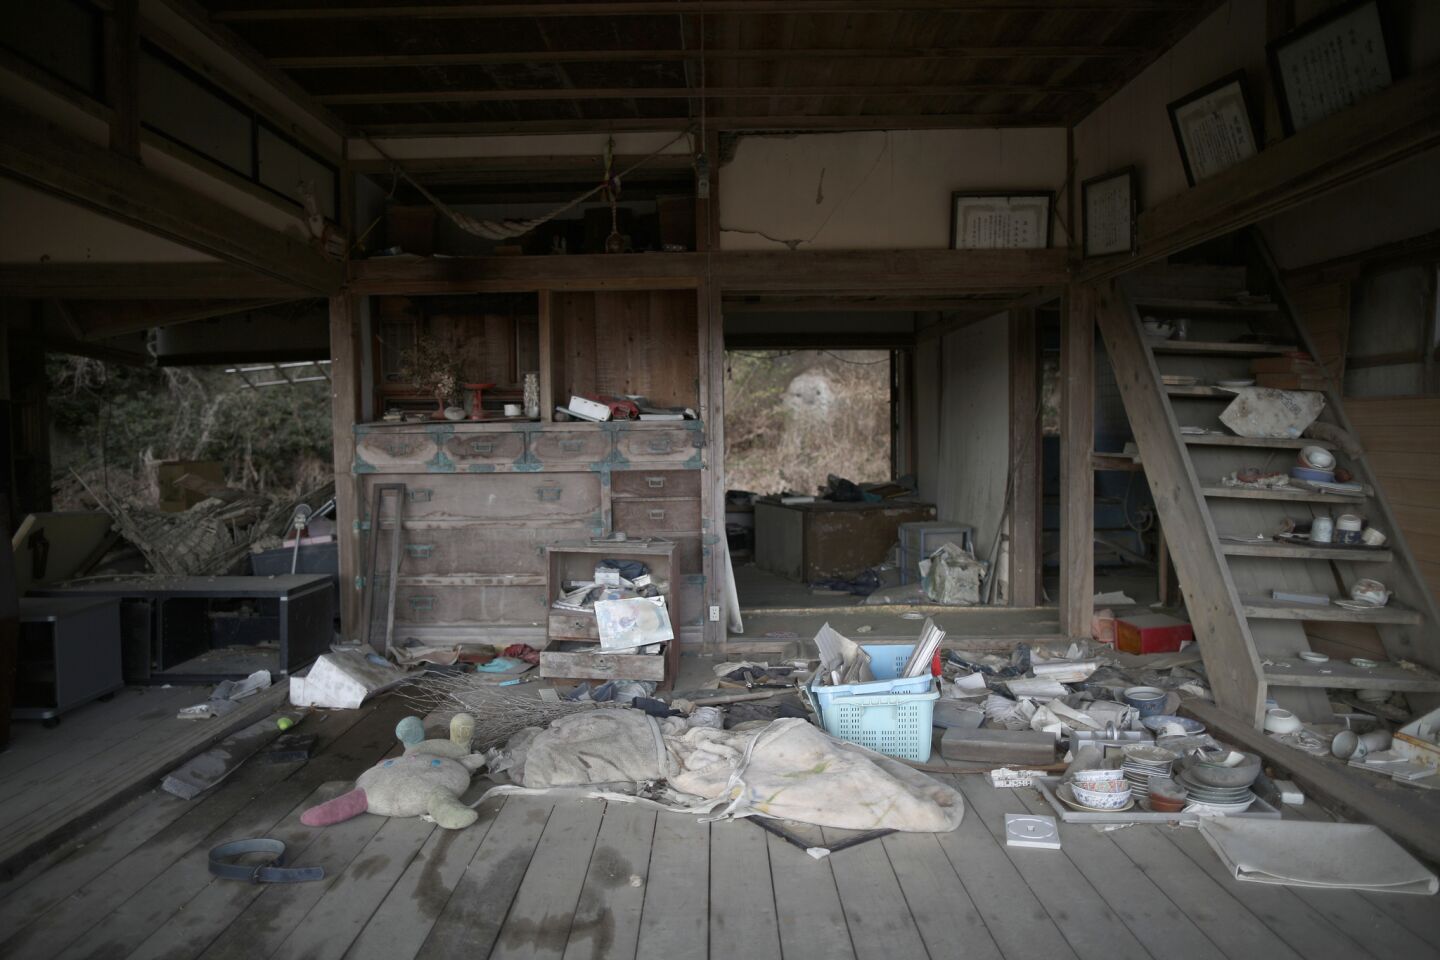 Personal items are strewn around a tsunami-damaged home Minamisoma. The nuclear disaster forced the evacuation of 99,750 people.